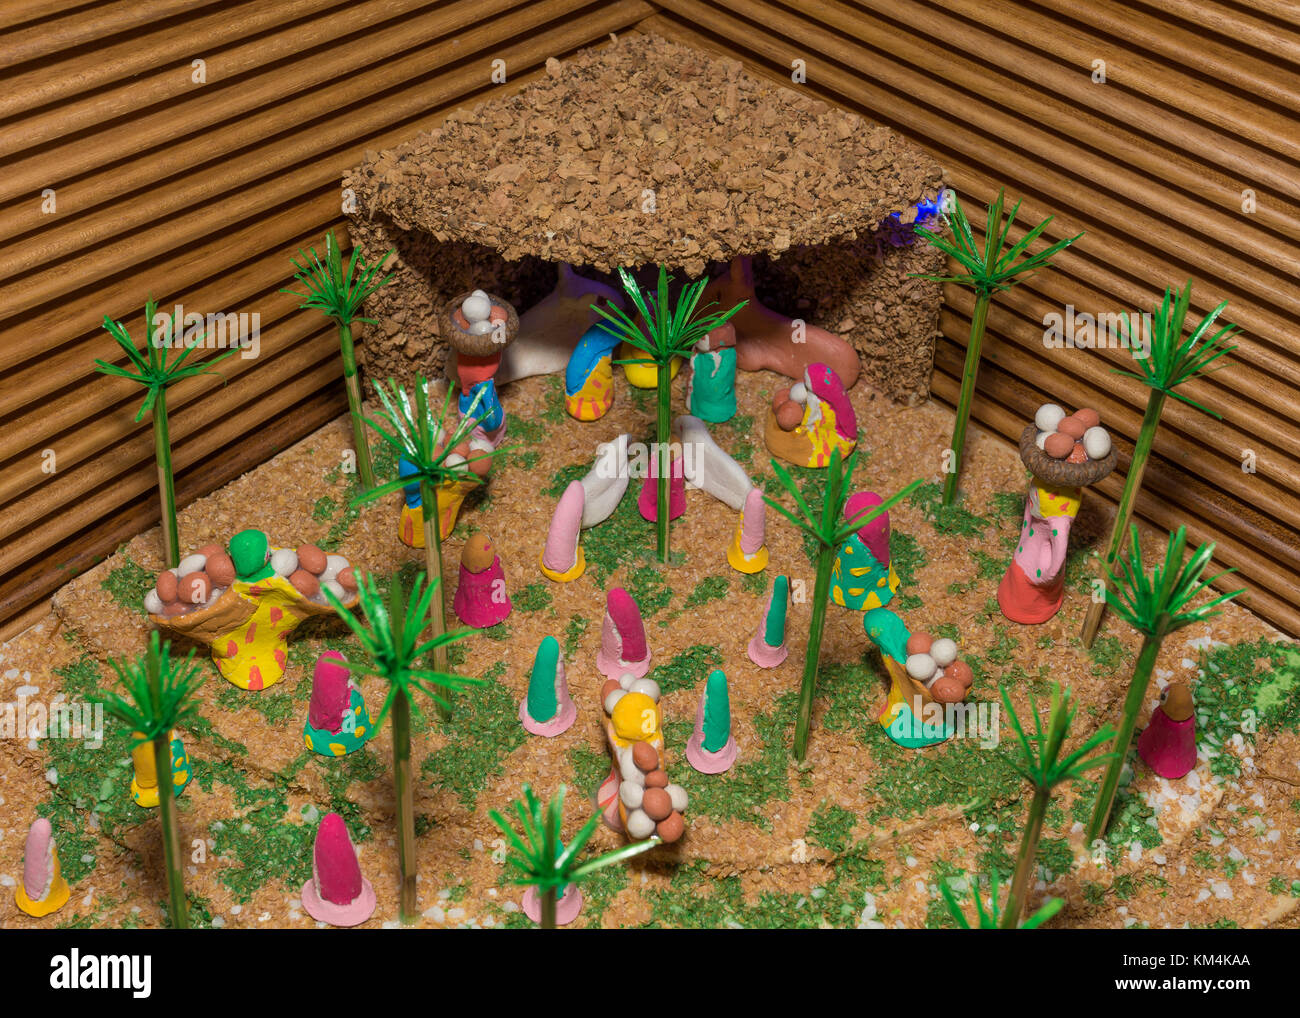 Christmas nativity scene represented with statuettes of Mary, Joseph, Jesus and other characters of the crib. Original representation. Stock Photo